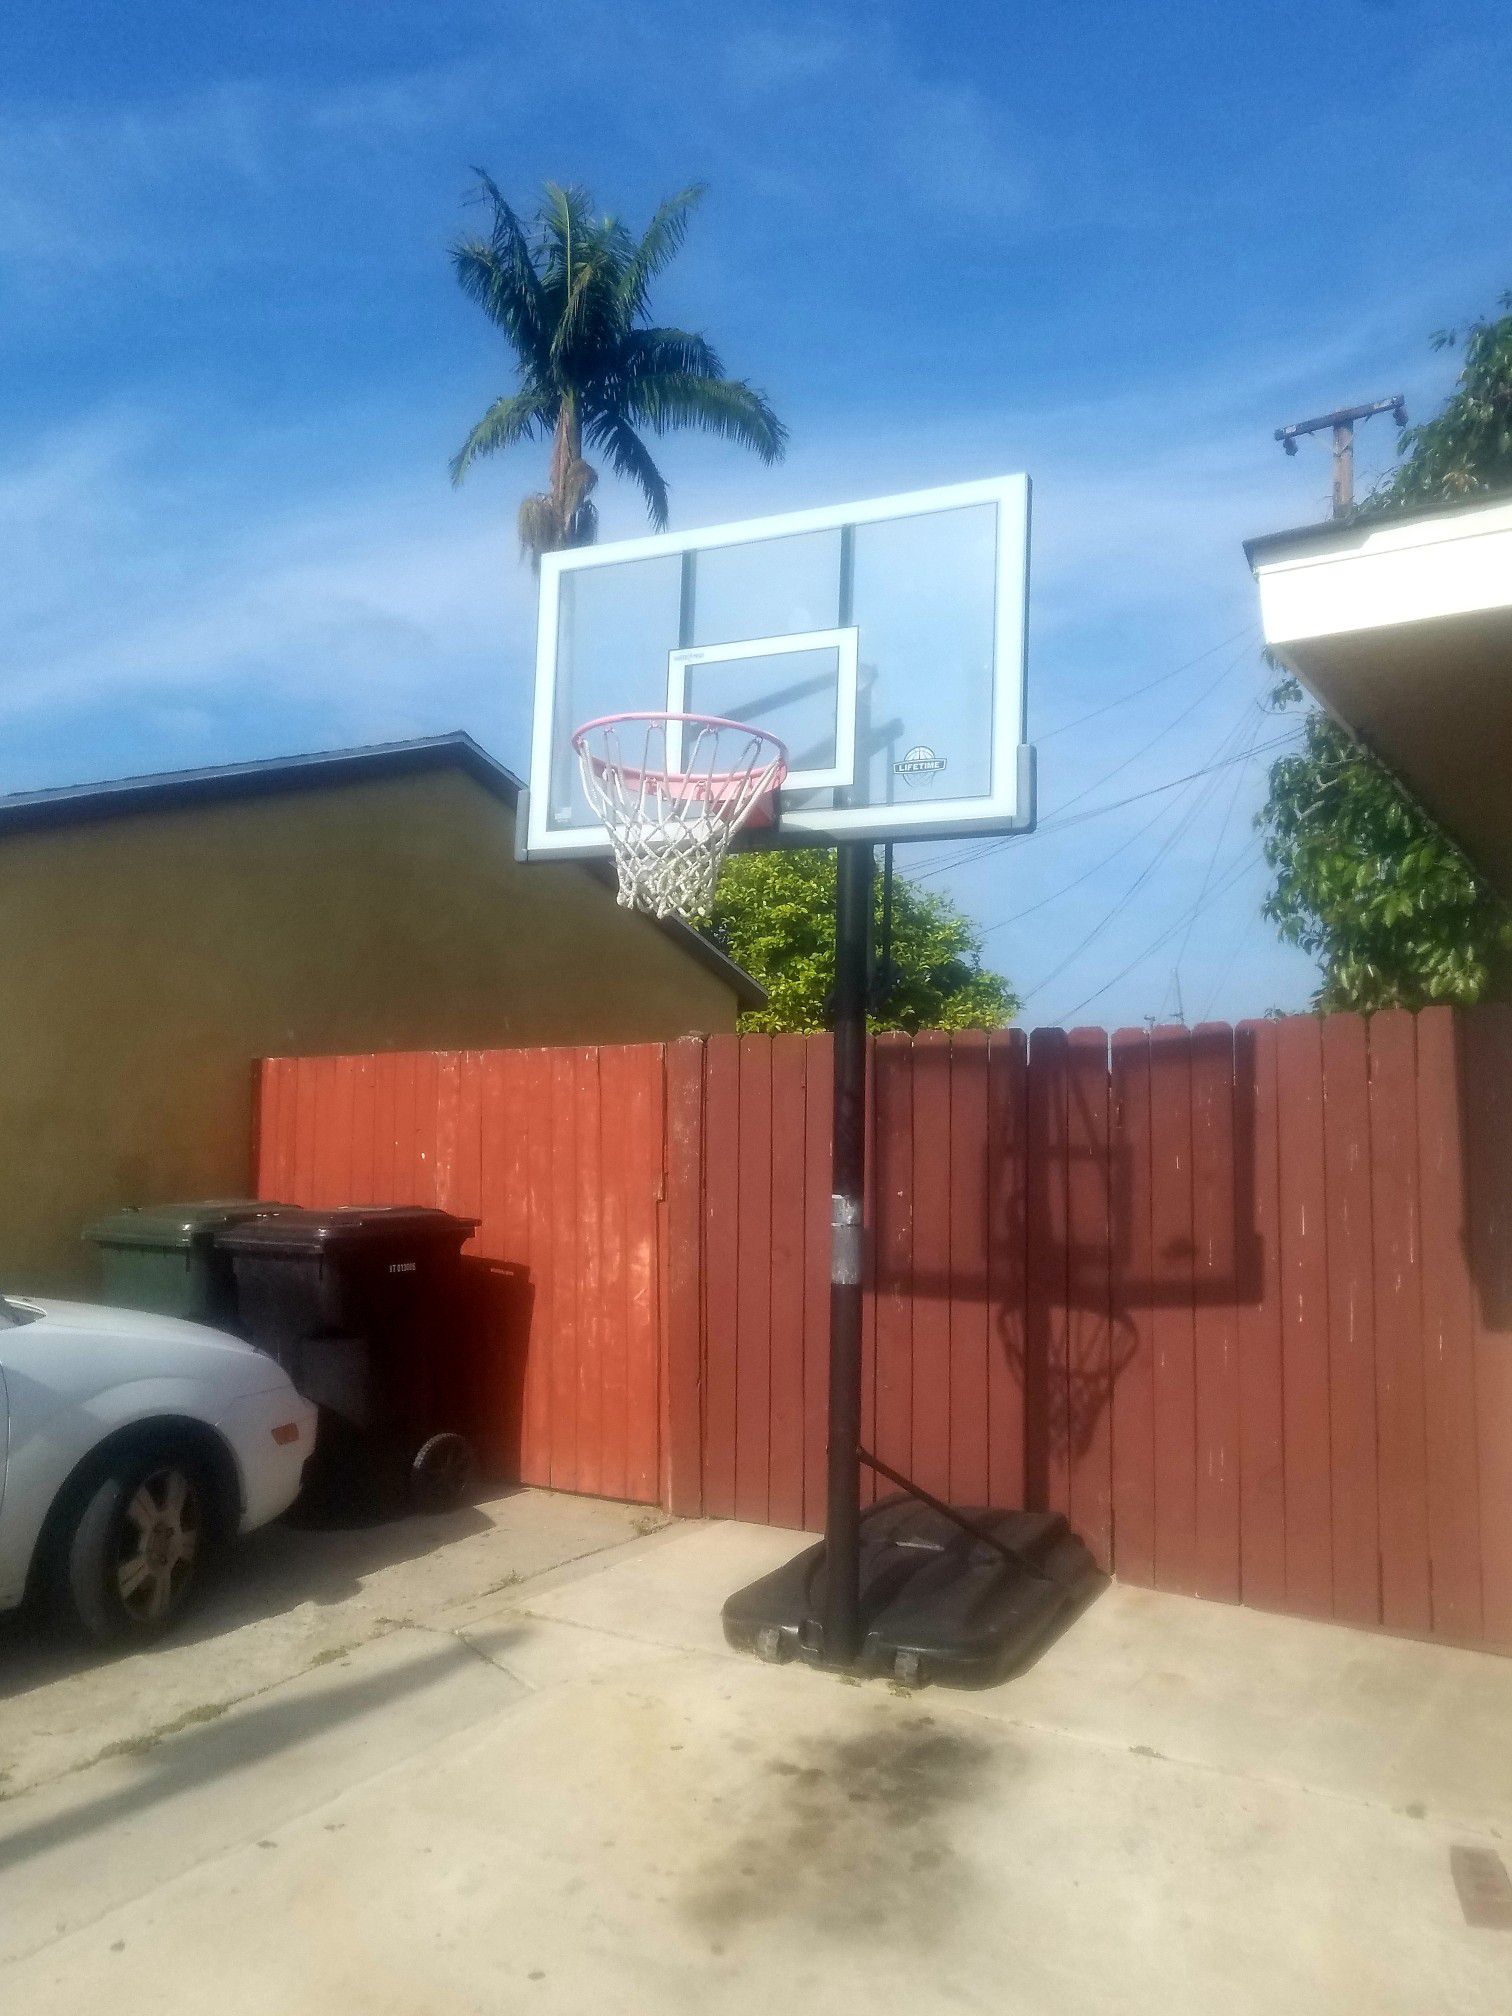 Lifetime 54" Basketball Hoop Serious Buyers Only! 1st come $100 firm offers only